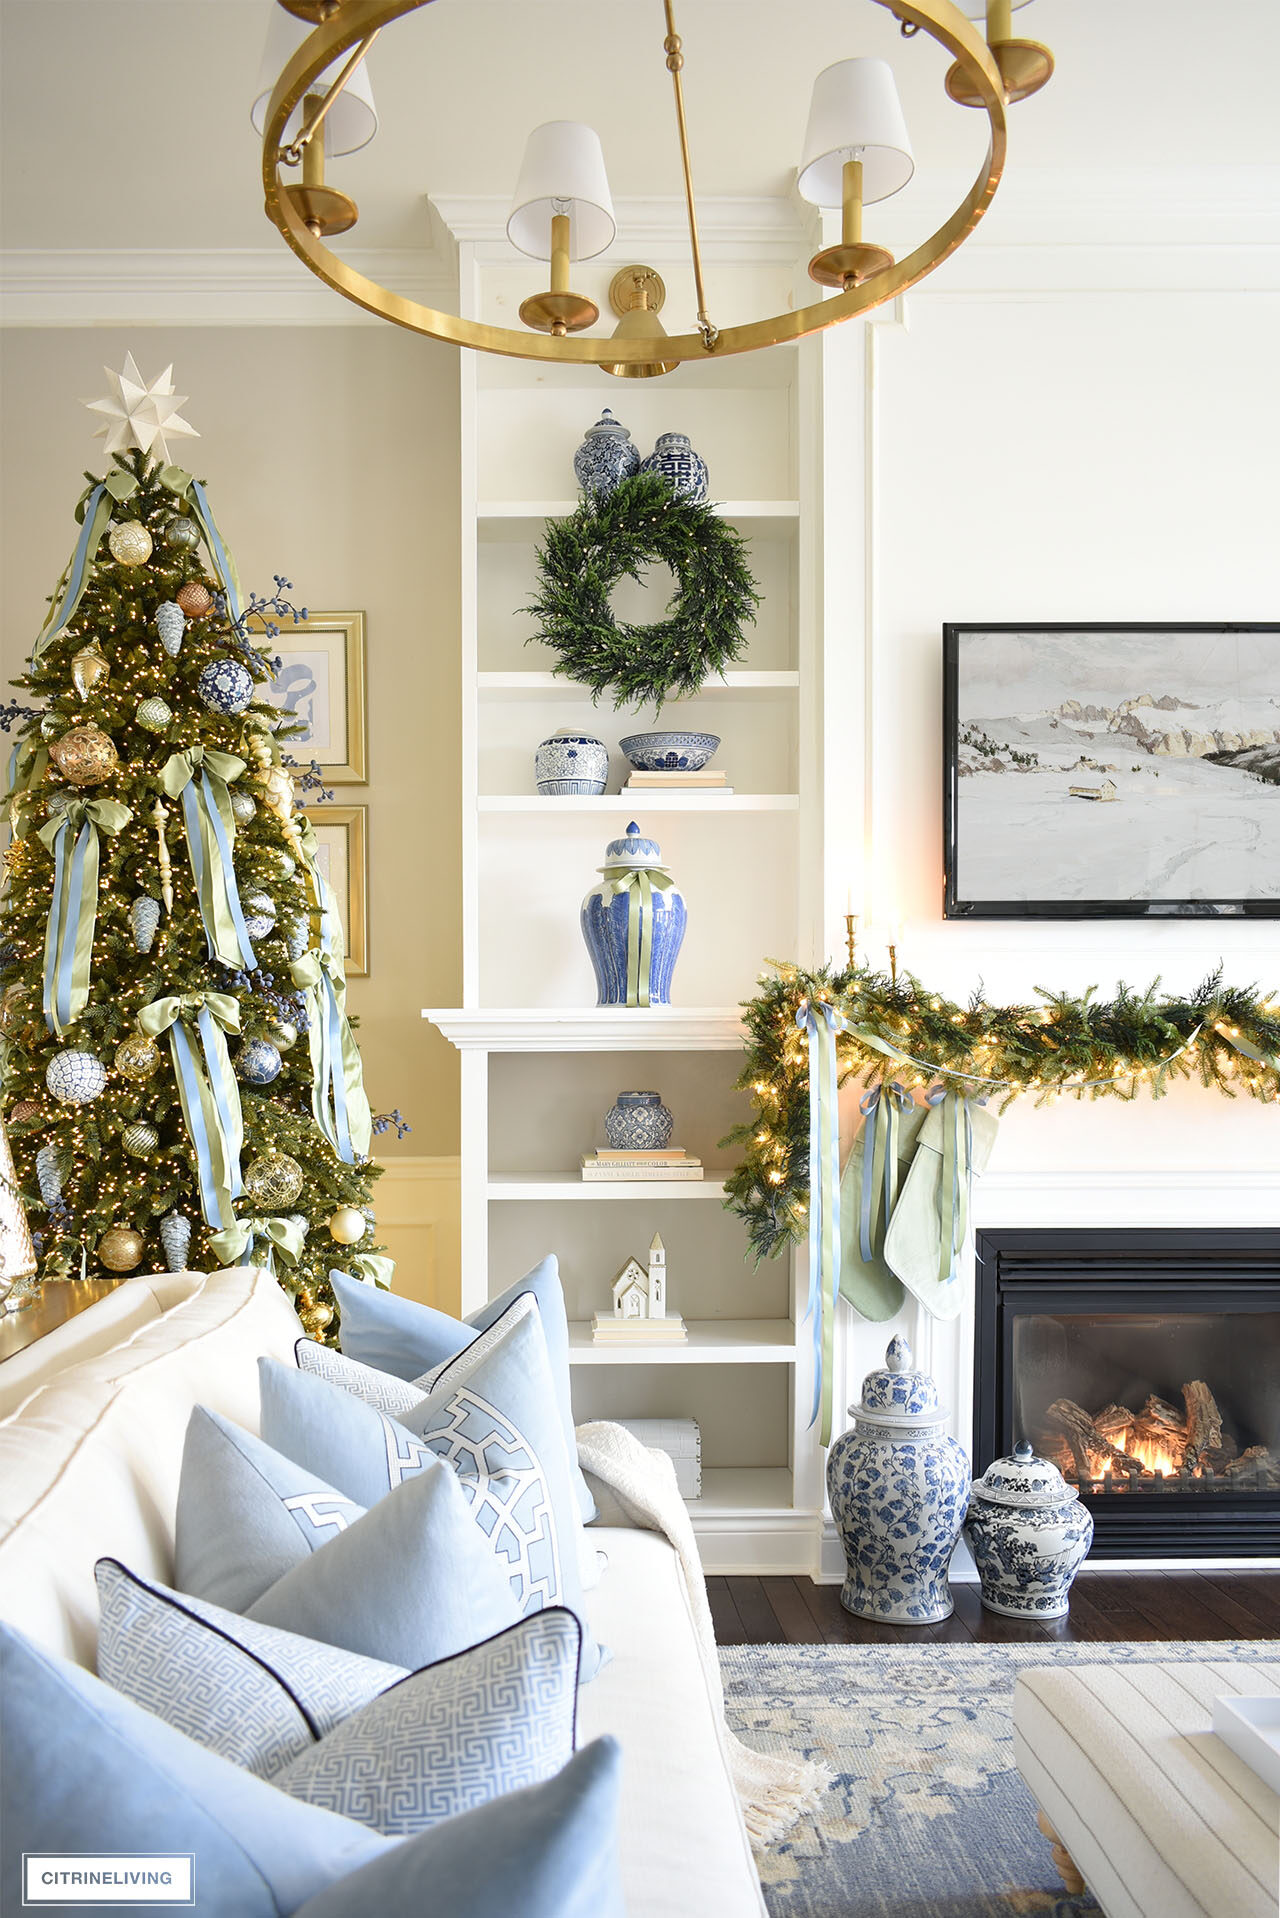 Sage Green & Gold Christmas Decor in the Family Room